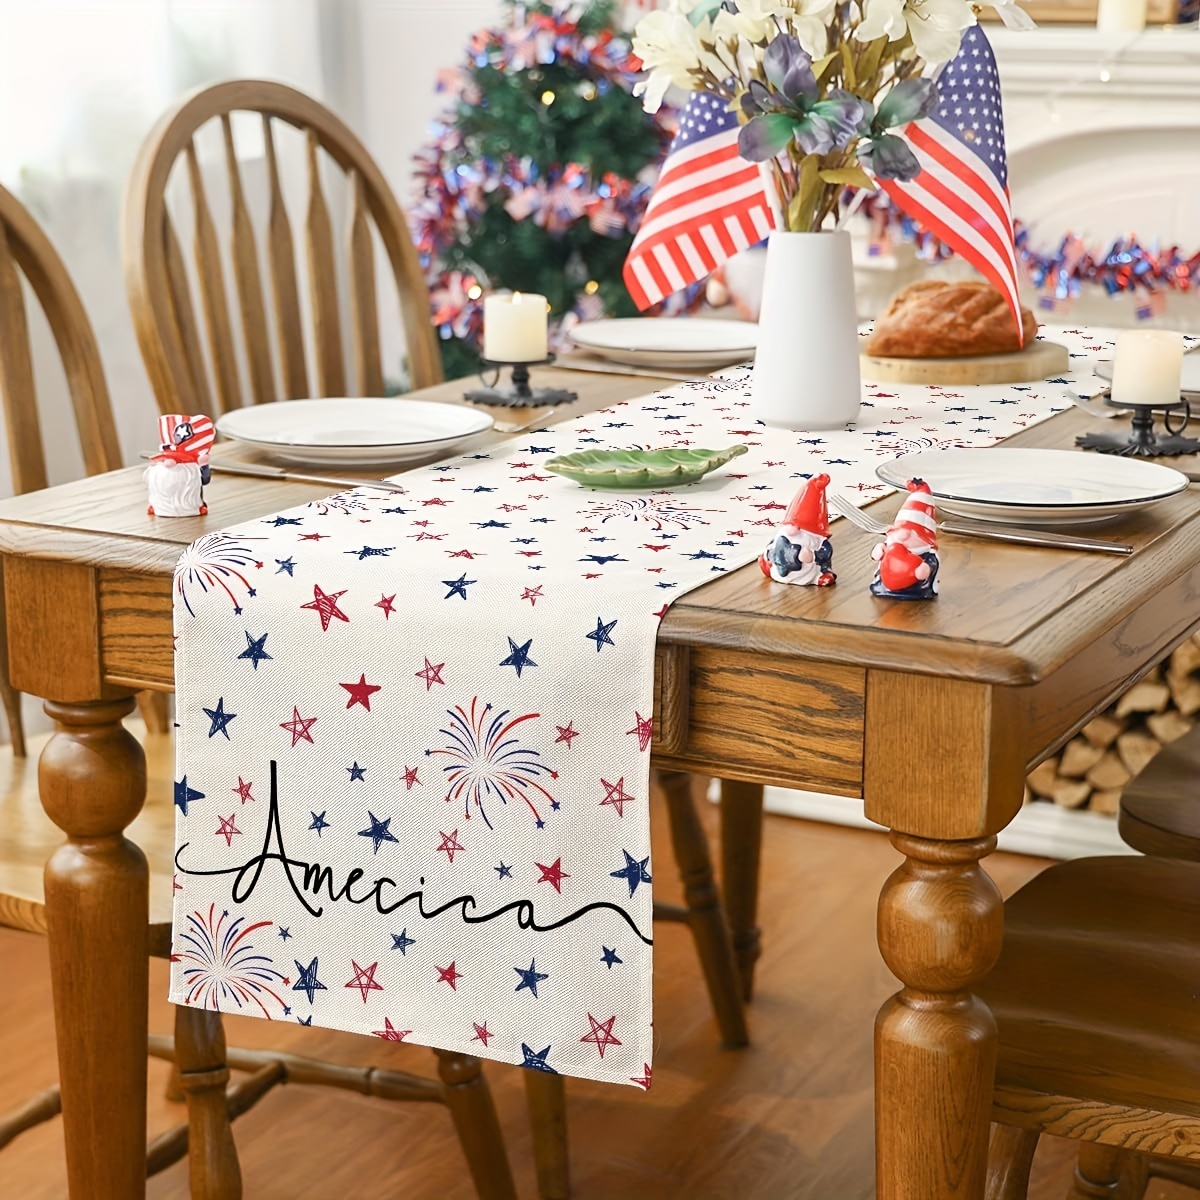 

1pc, Table Runner, Patriotic Independence Day Table Runner, Striped Stars 4th Of July Table Runner, Home Kitchen Dining Decor, Party Decoration, Gift, Holiday Decoration